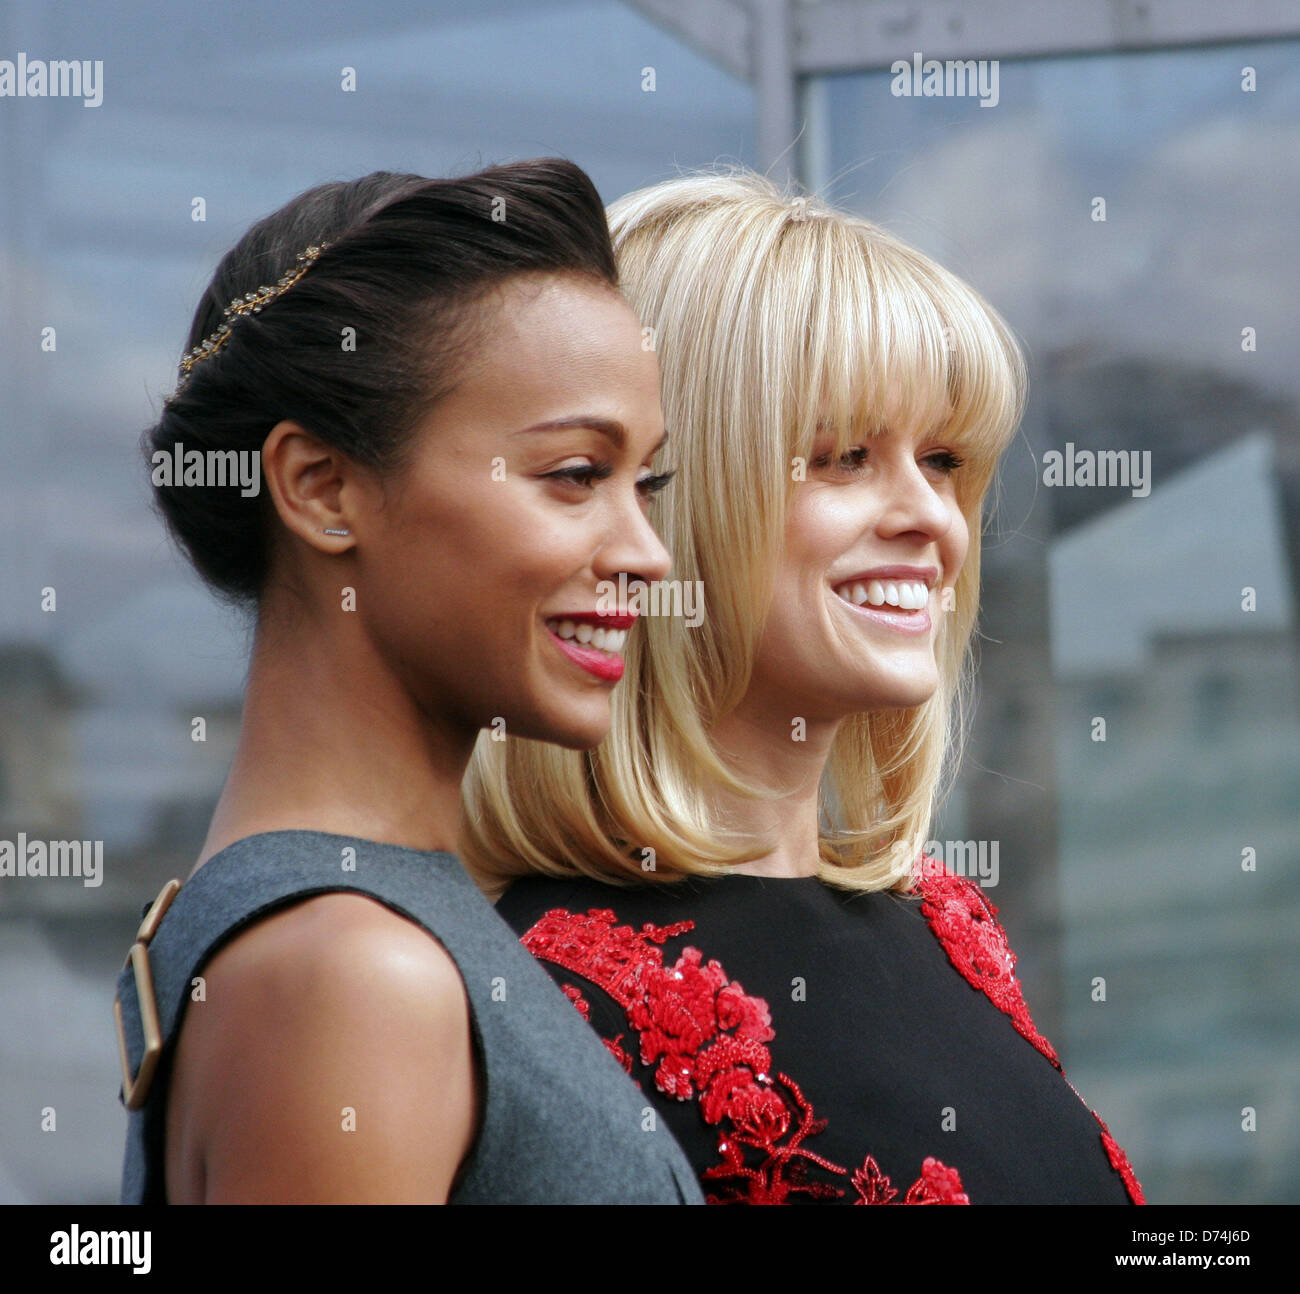 Berlin, Germany. 28th April, 2013. US actress Zoe Saldana (L) and British actress Alice Eve pose during the presentation of the movie 'Star Trek Into Darkness' in Berlin, Germany, 28 April 2013. The film will be released in Germany on 09 May 2013. Photo: XAMAX/dpa/dpa/Alamy Live News Stock Photo